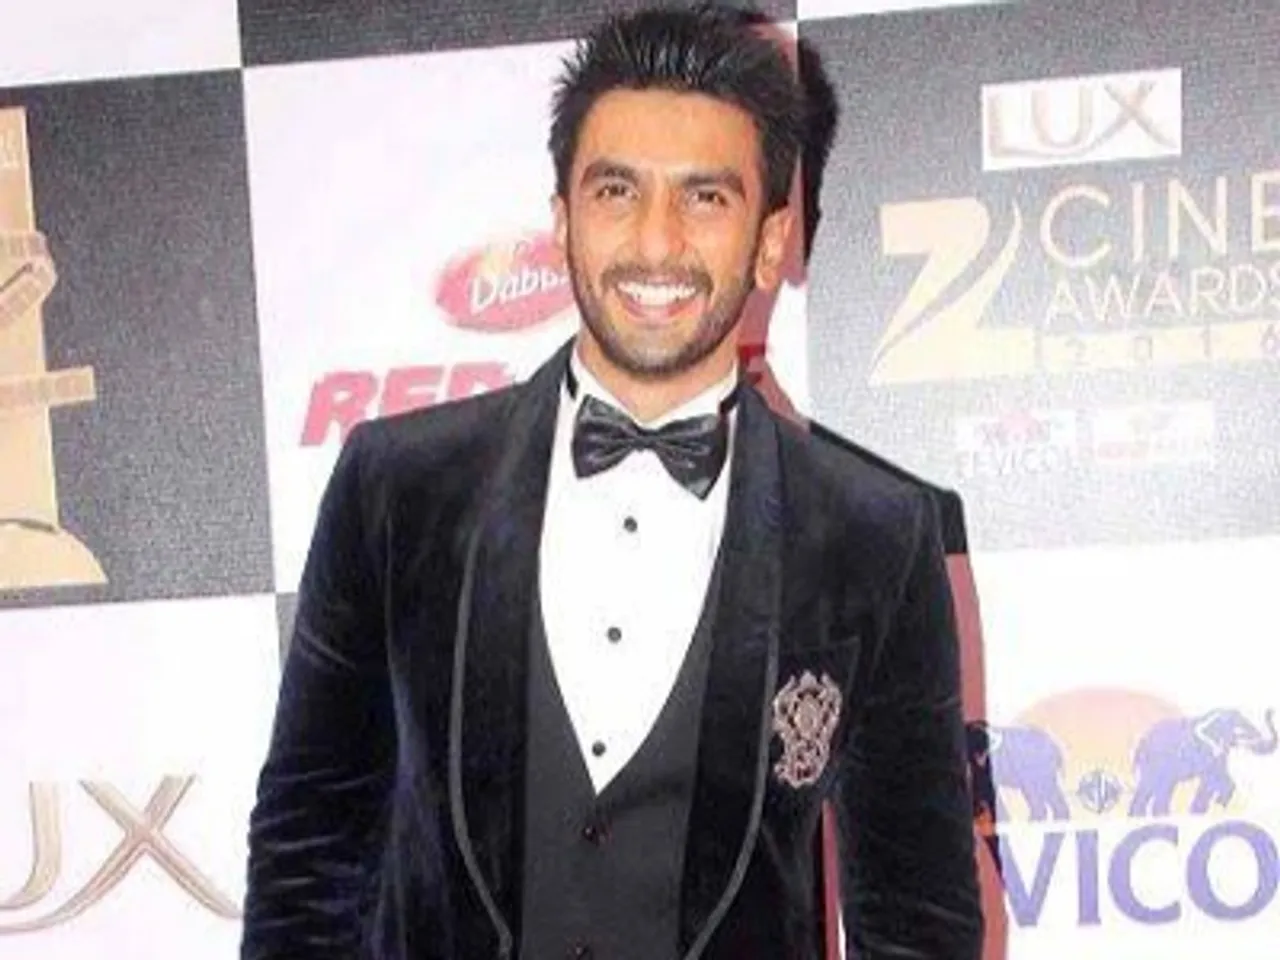 Superstar Ranveer Singh is on a meteoric rise, according to the Celebrity Brand Valuation Report by Duff & Phelps!